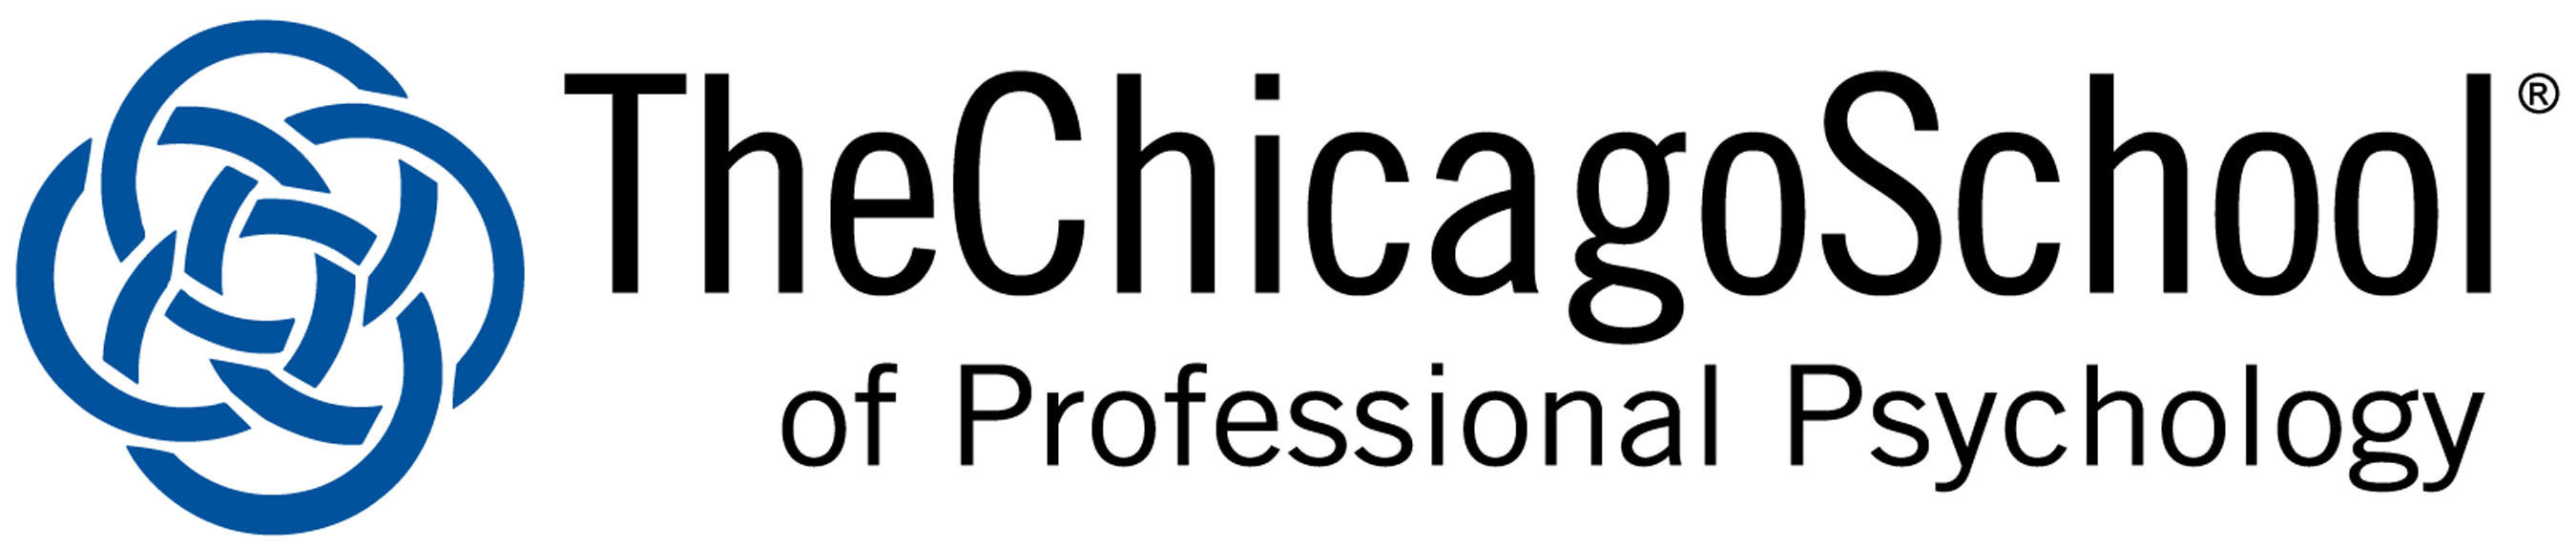 The Chicago School of Professional Psychology logo.